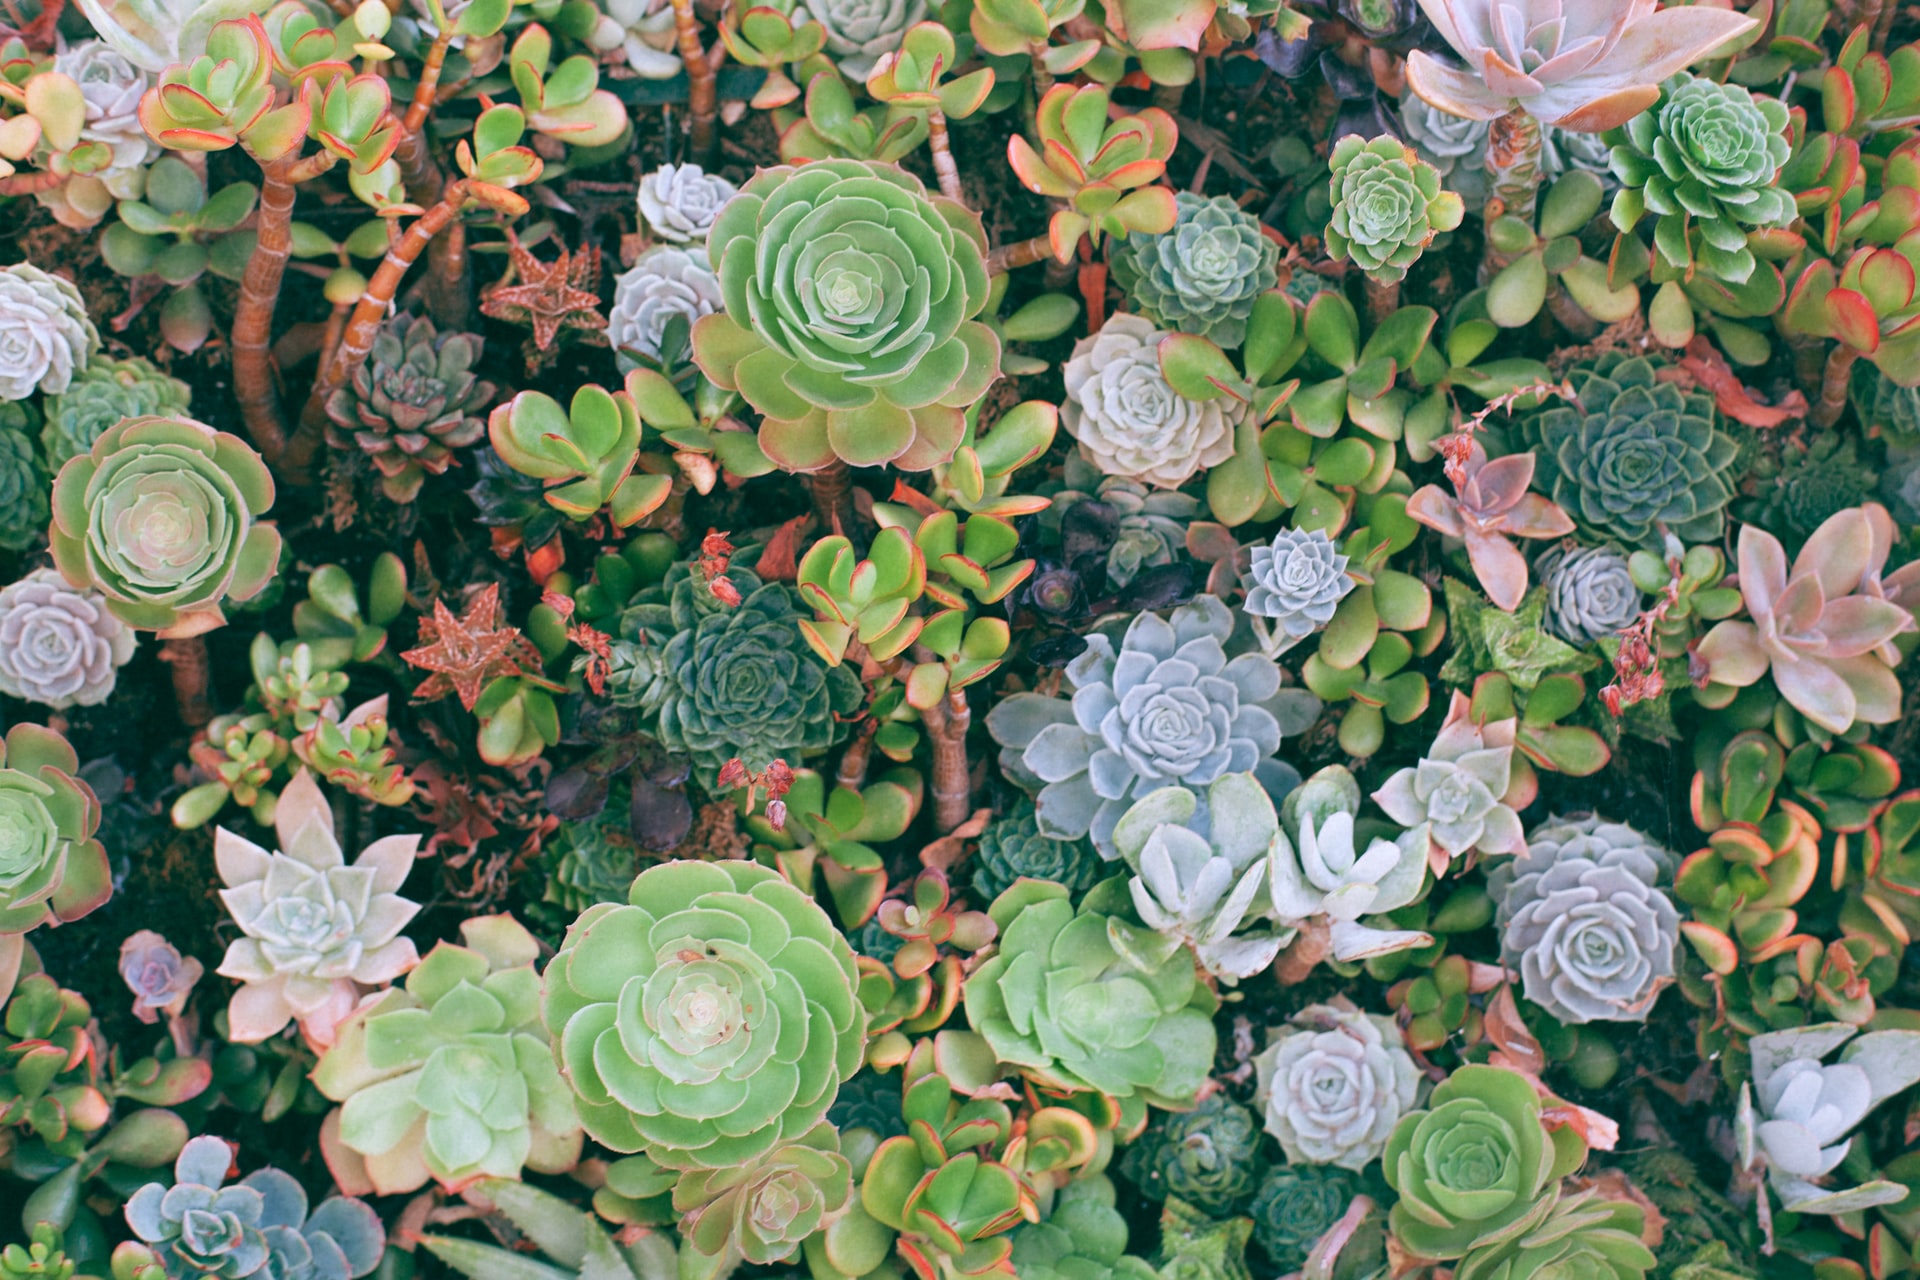 The Different Types of Succulent Plants and Their Healing Purposes